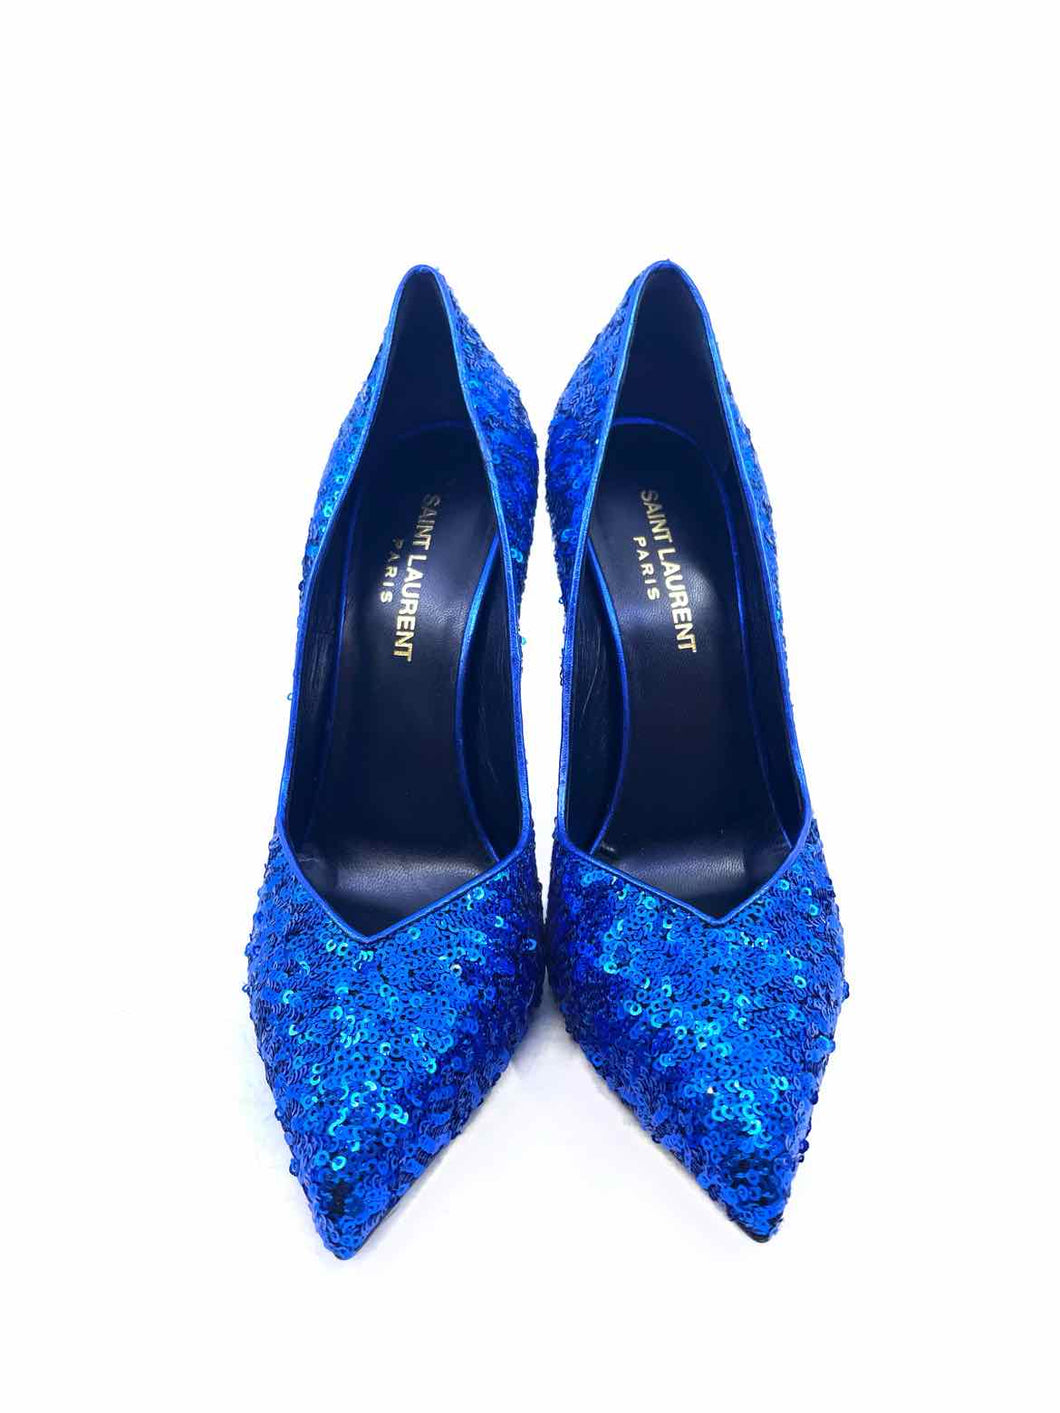 Sparkly Ocean Blue Evening Party Sequins Pumps 2021 Leather 8 cm Stiletto  Heels Pointed Toe Pumps High Heels